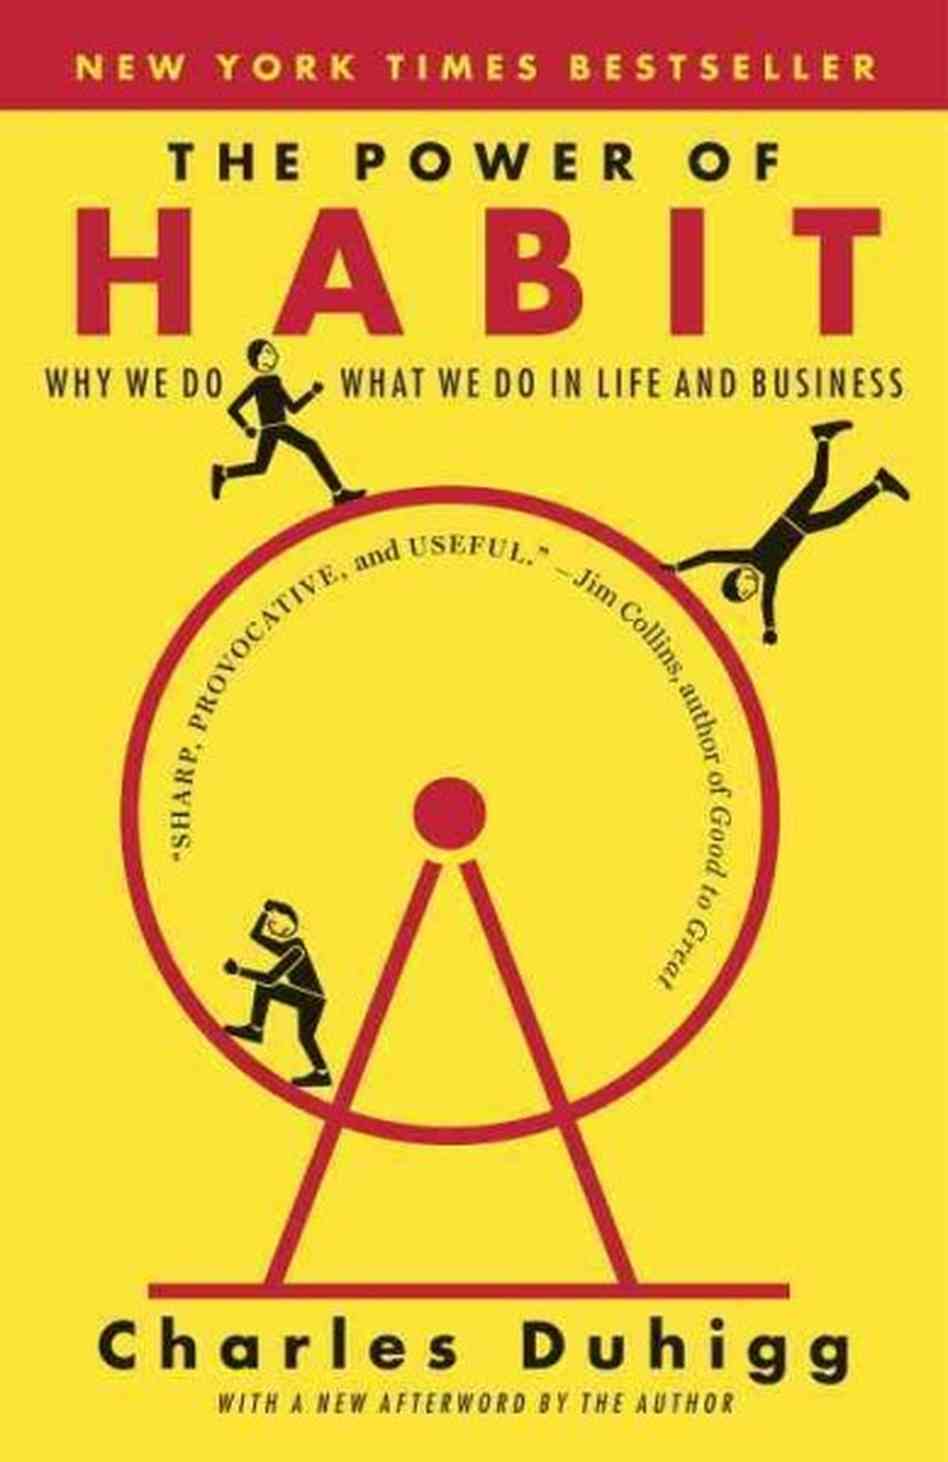 THE POWER OF HABIT: WHY WE DO WHAT WE DO IN LIFE AND BUSINES